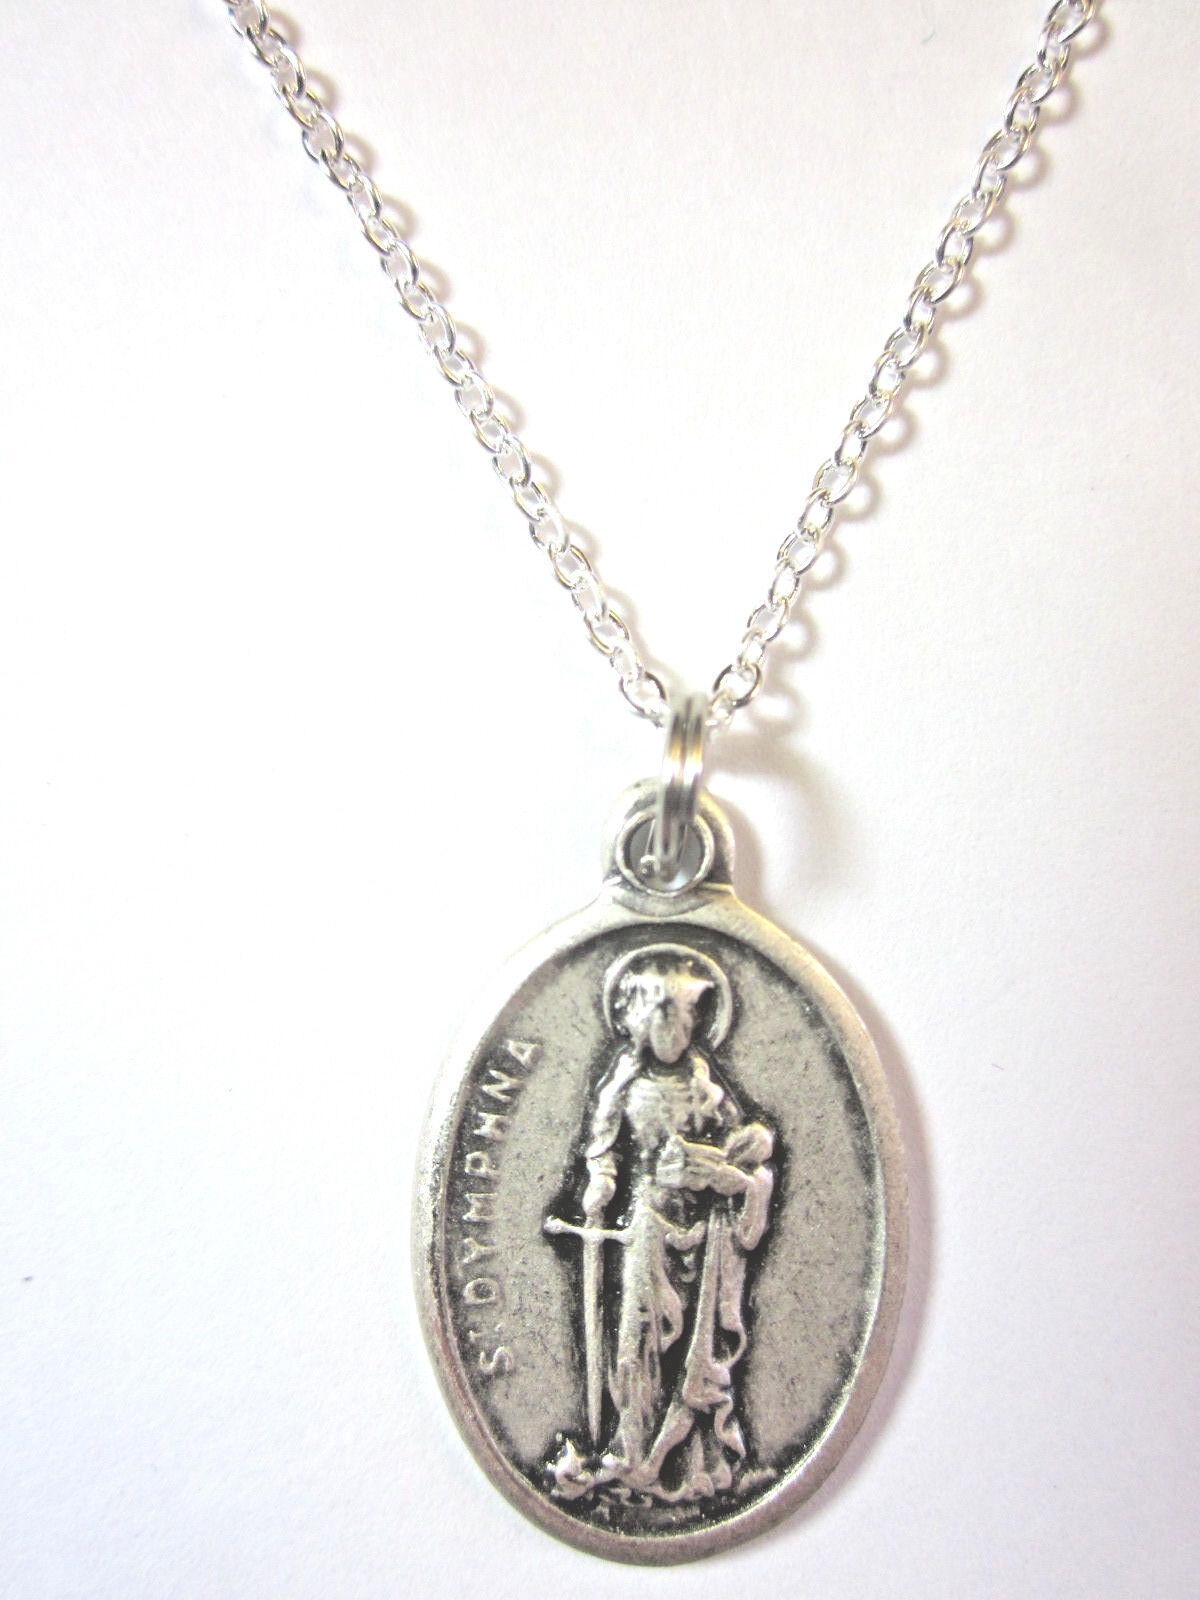 Ladies St Dymphna Medal Italy Pendant Necklace 20